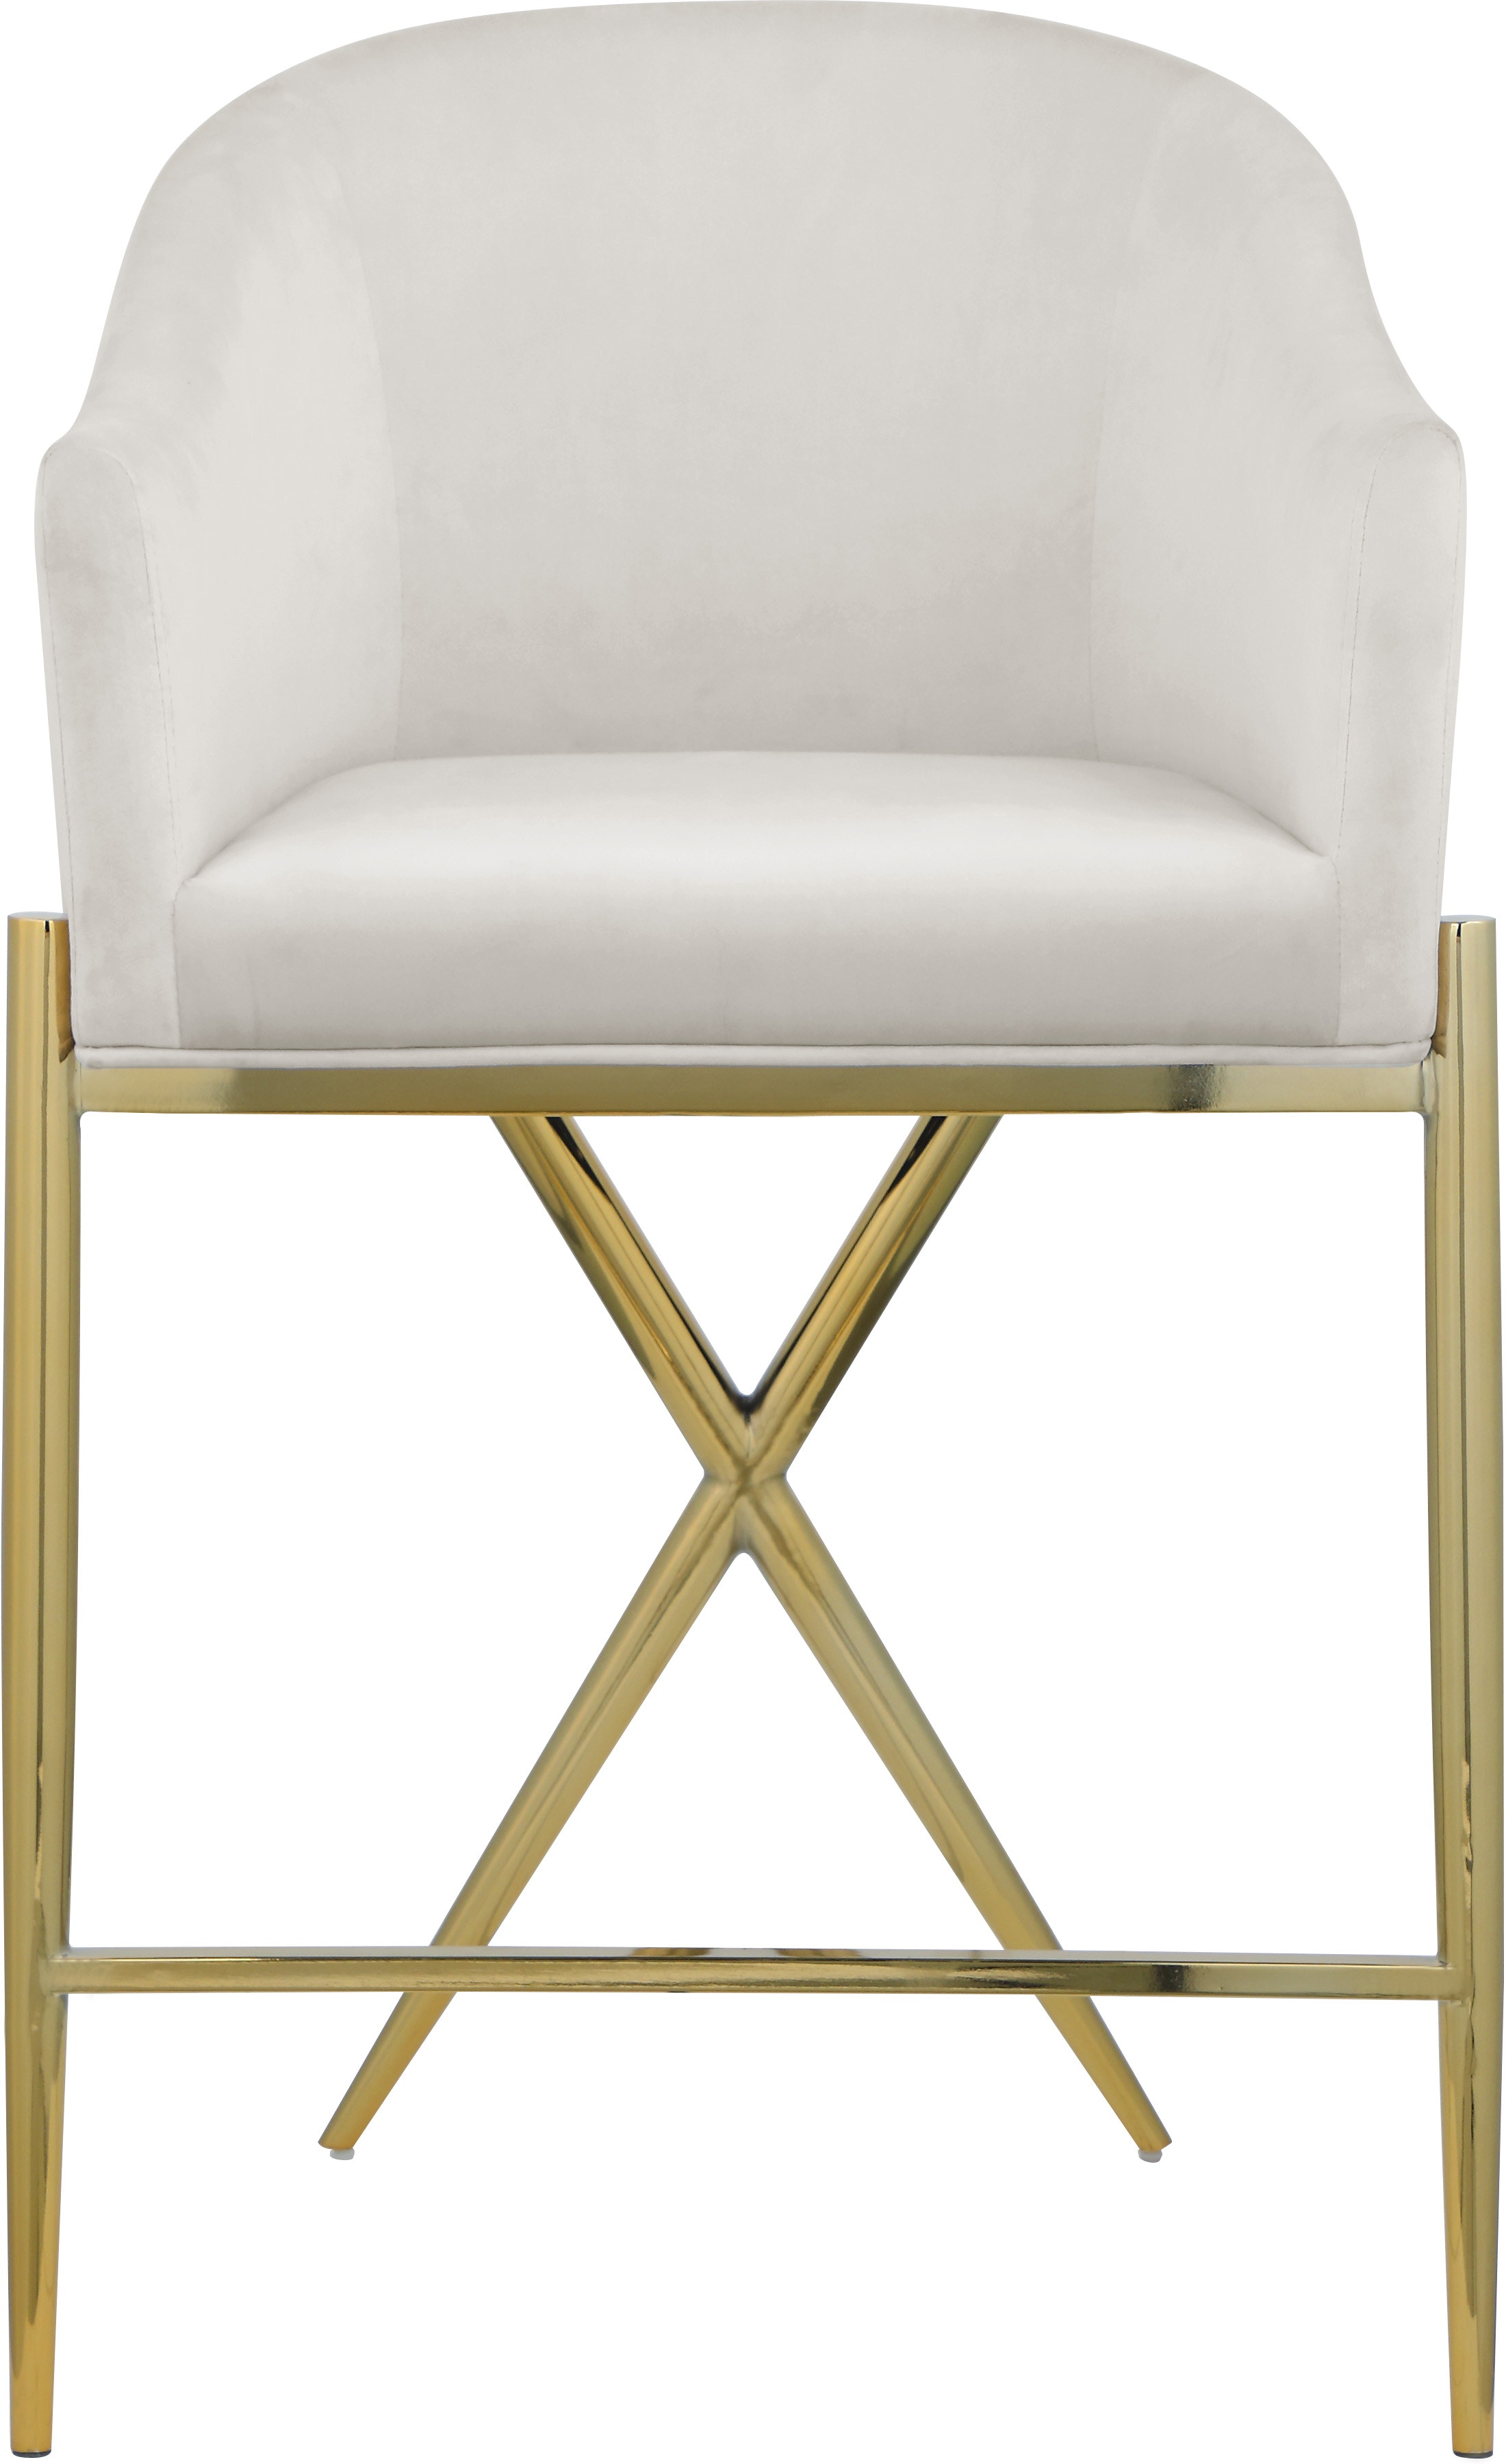 Navy Meridian Furniture 866Navy-C Xavier Collection Velvet Upholstered Counter Stool with Sturdy Chrome Metal Legs 23.5 W x 22.5 D x 38 H